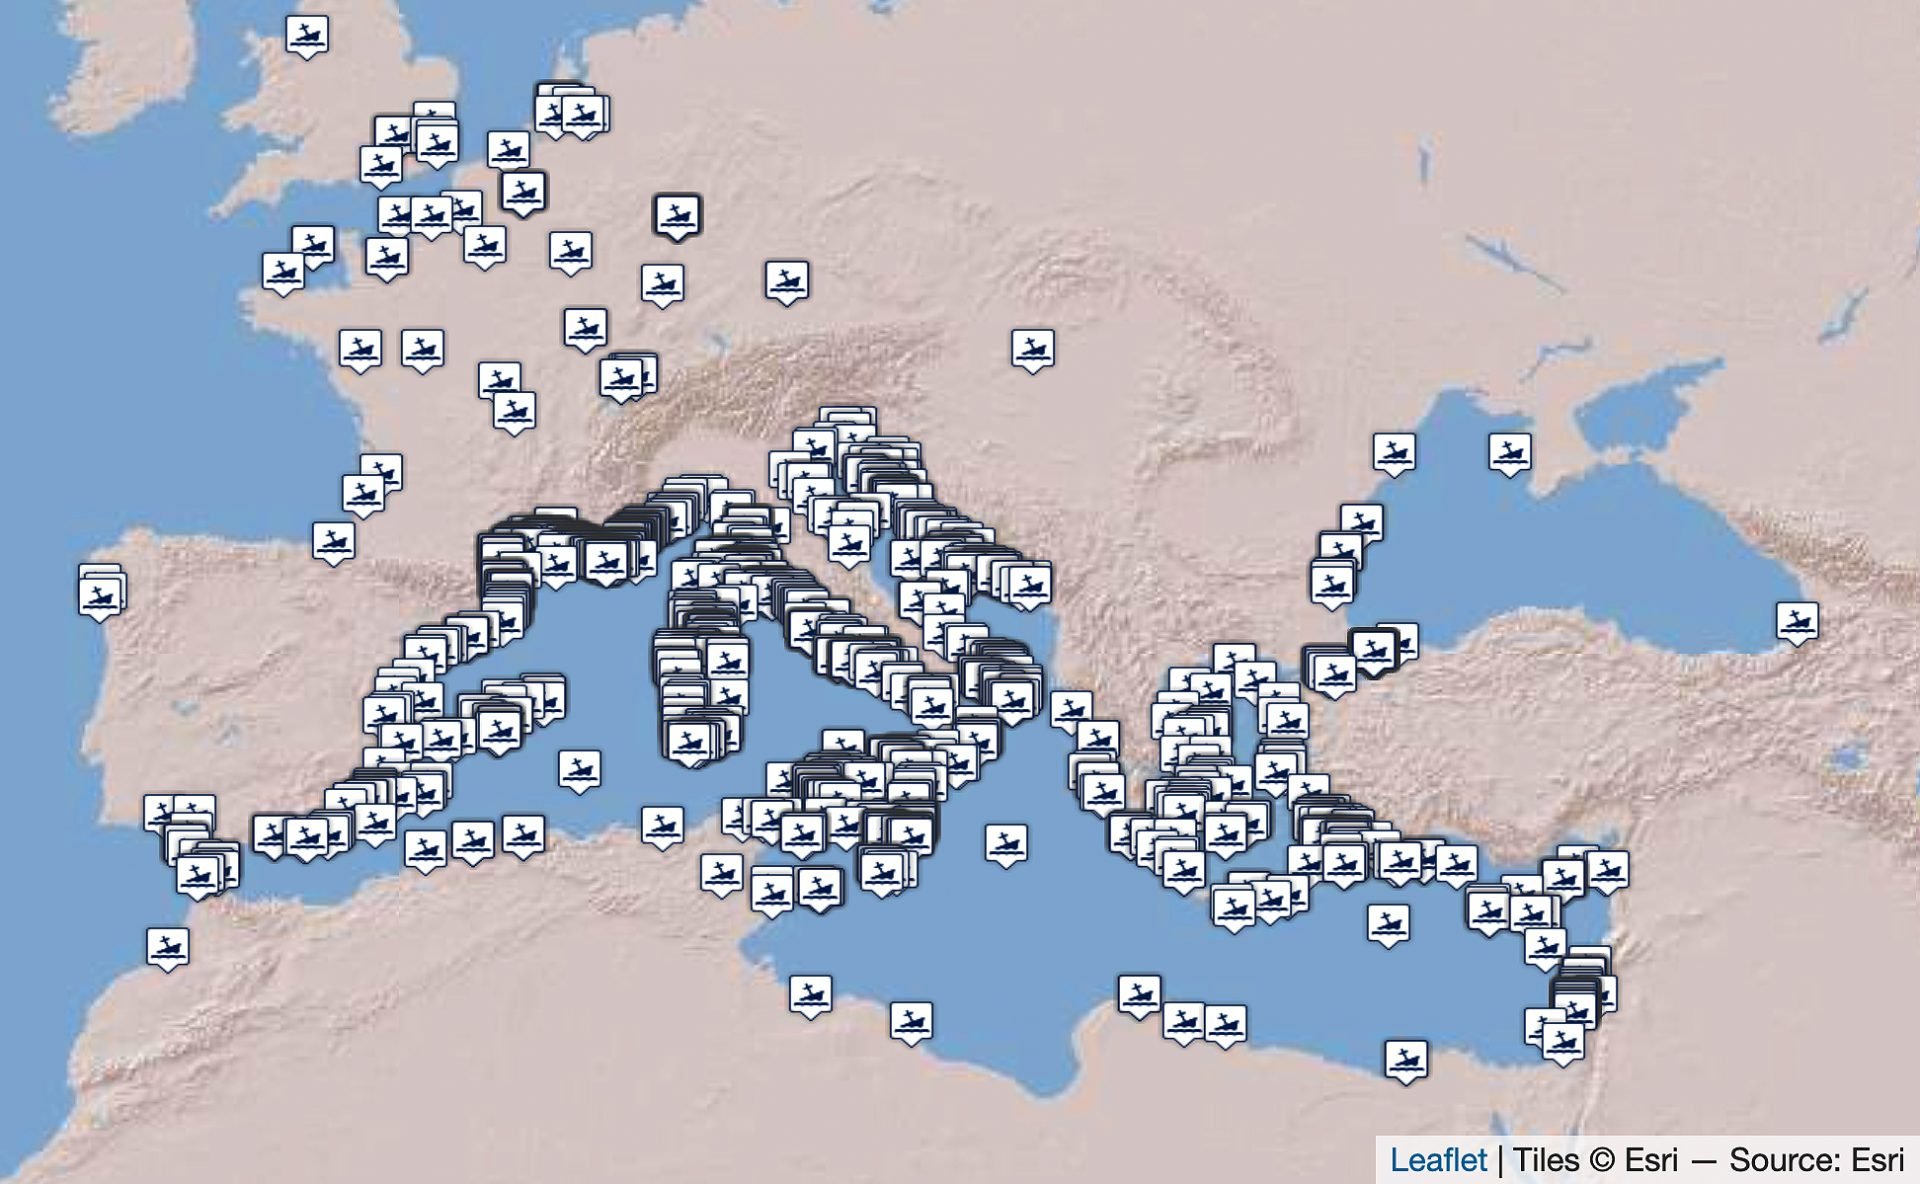 Map showcasing locations of known ancient shipwrecks in the Mediterranean up to AD 1500, building upon A.J. Parker and Julia Strauss's research. Includes roughly 600 newly discovered sites post-1992, found in various terrains and depths.